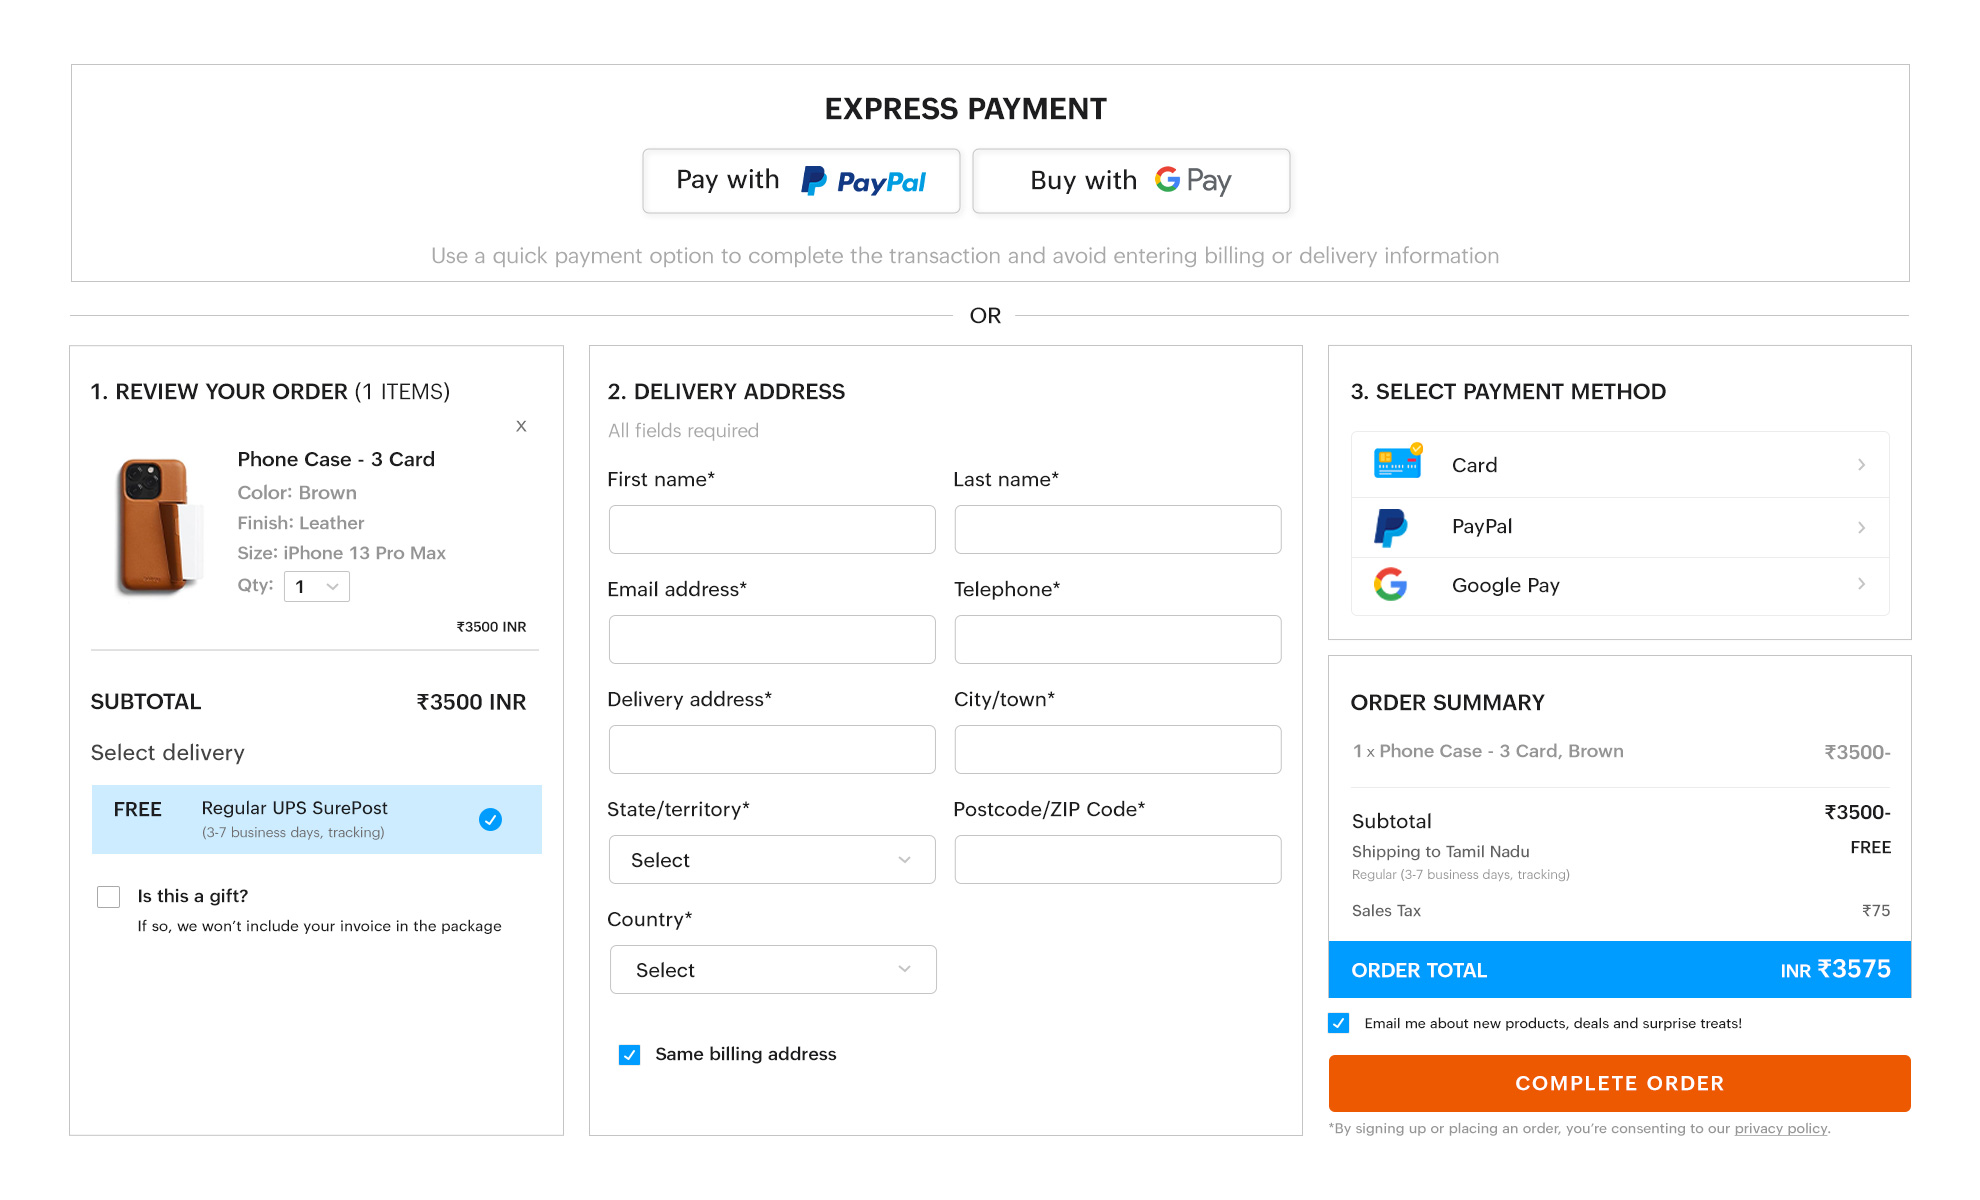 Offer multiple payment options for better ecommerce checkout optimization